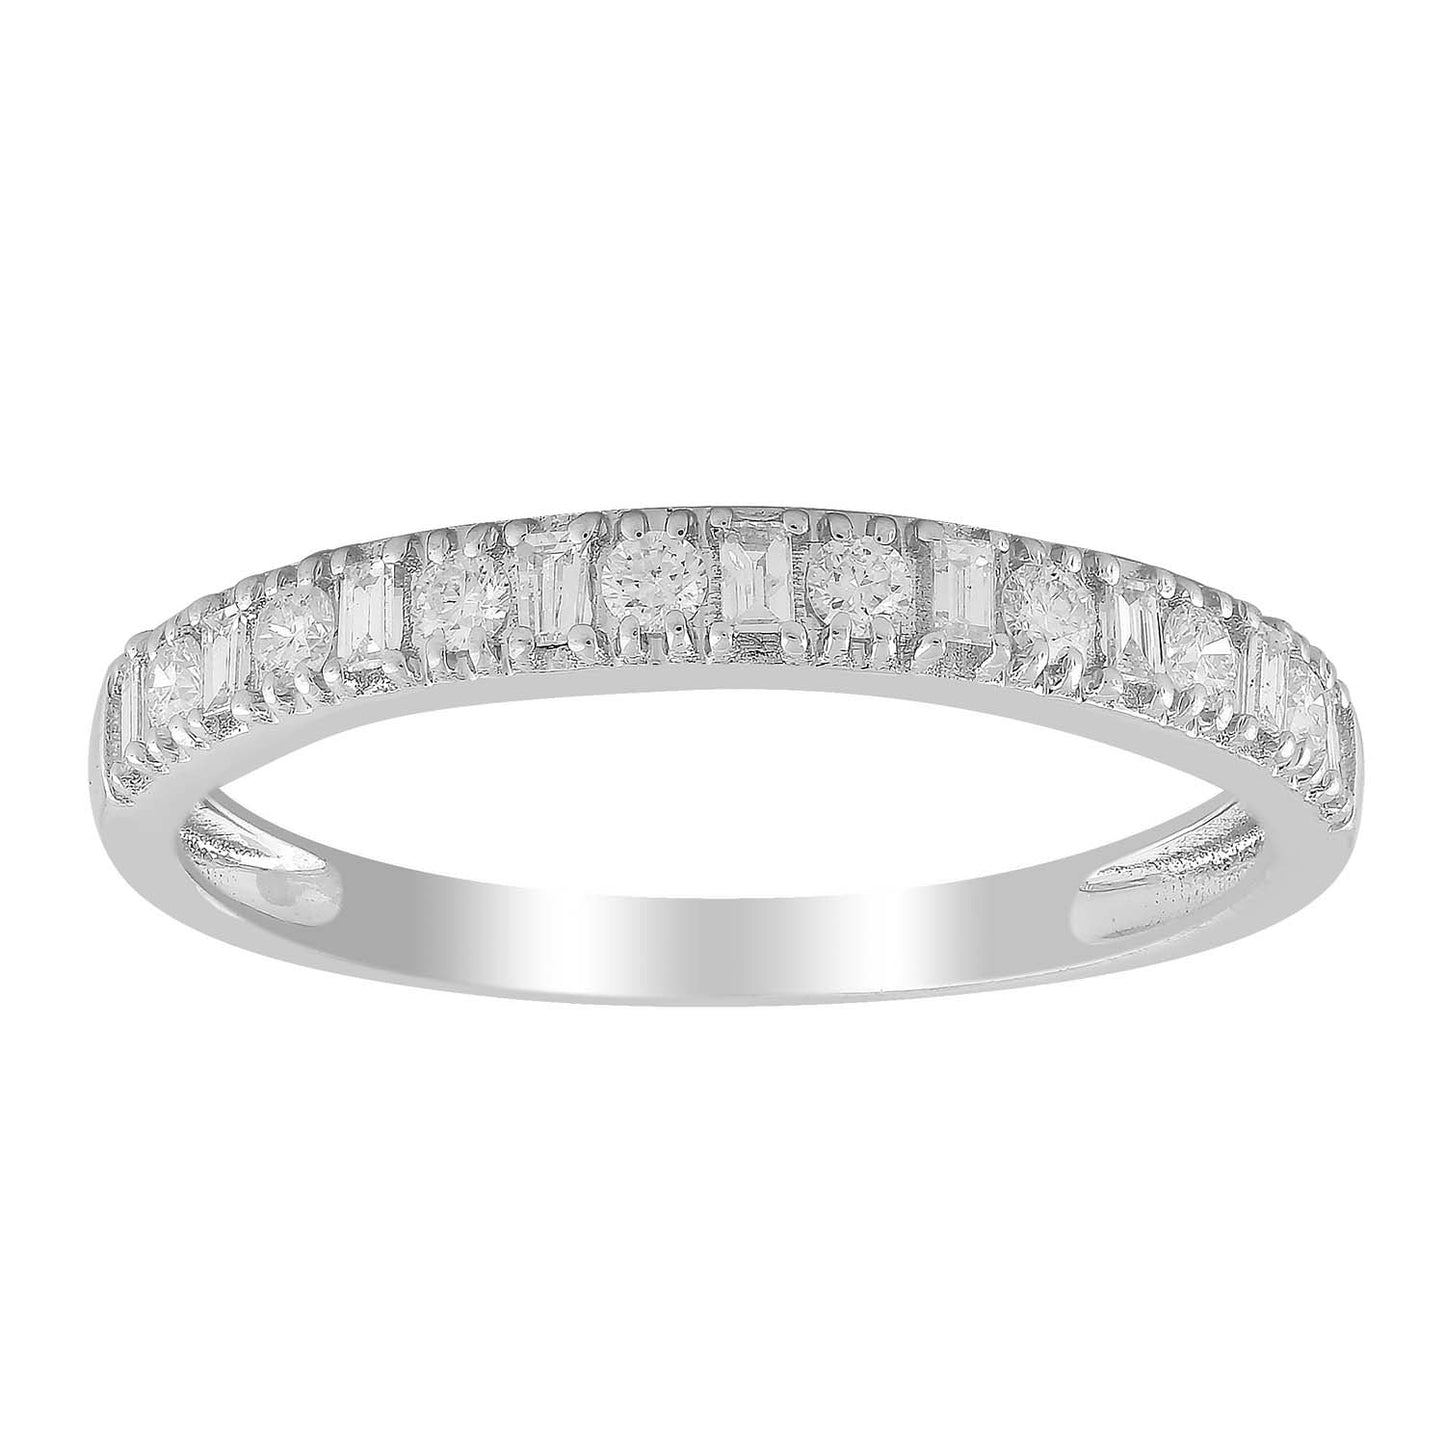 Ring with 0.20ct Diamond in 9K White Gold